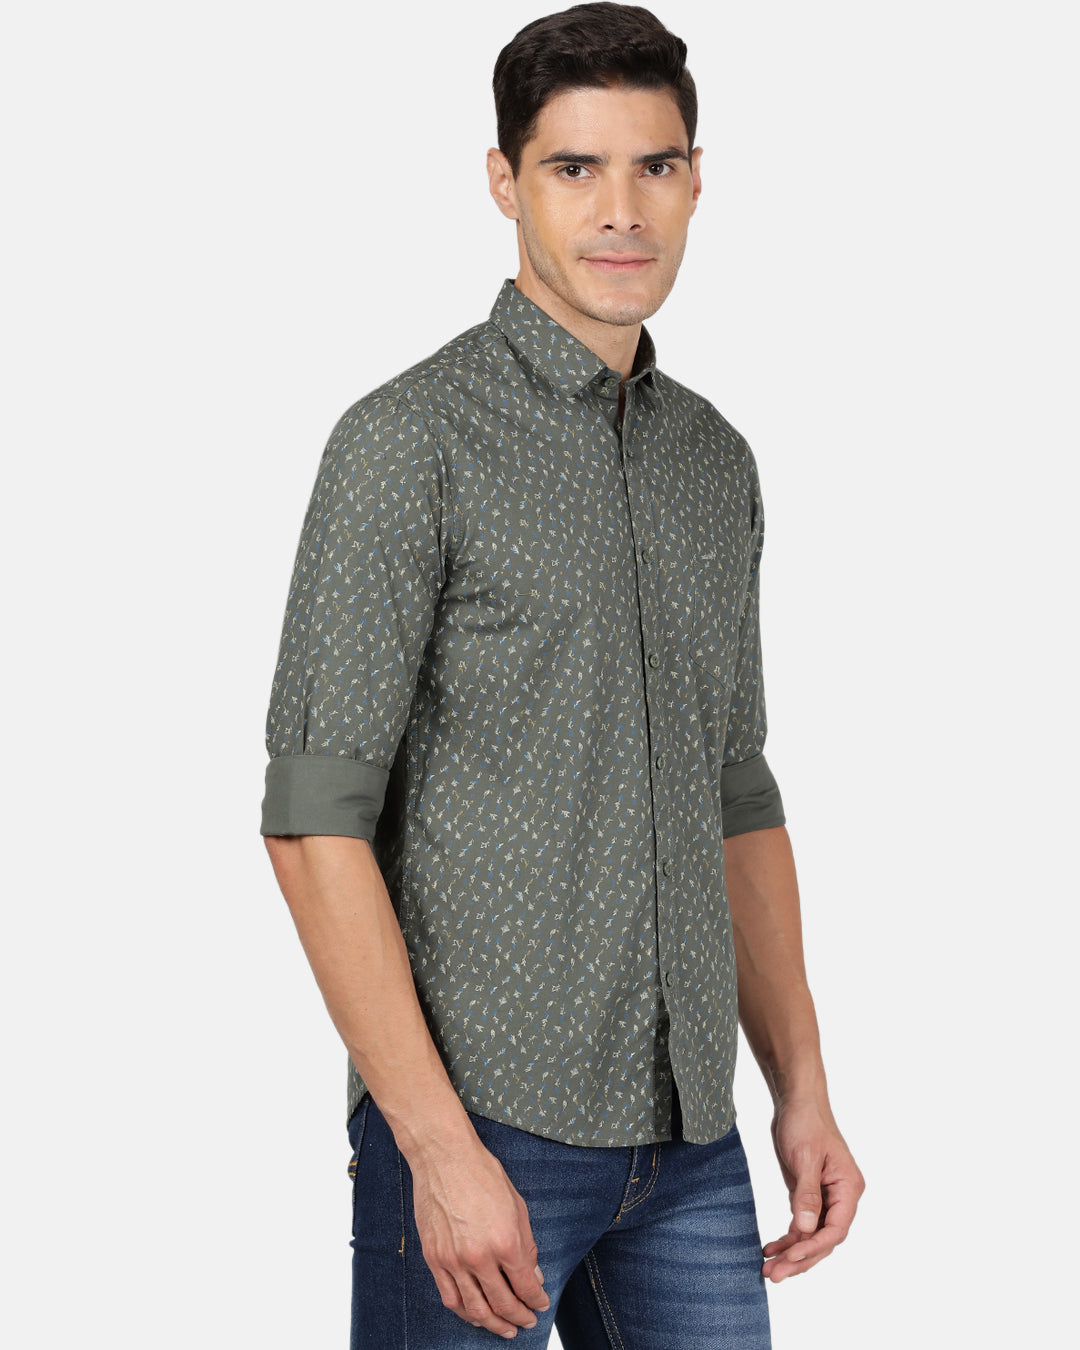 Crocodile Casual Full Sleeve Slim Fit Printed Green with Collar Shirt for Men